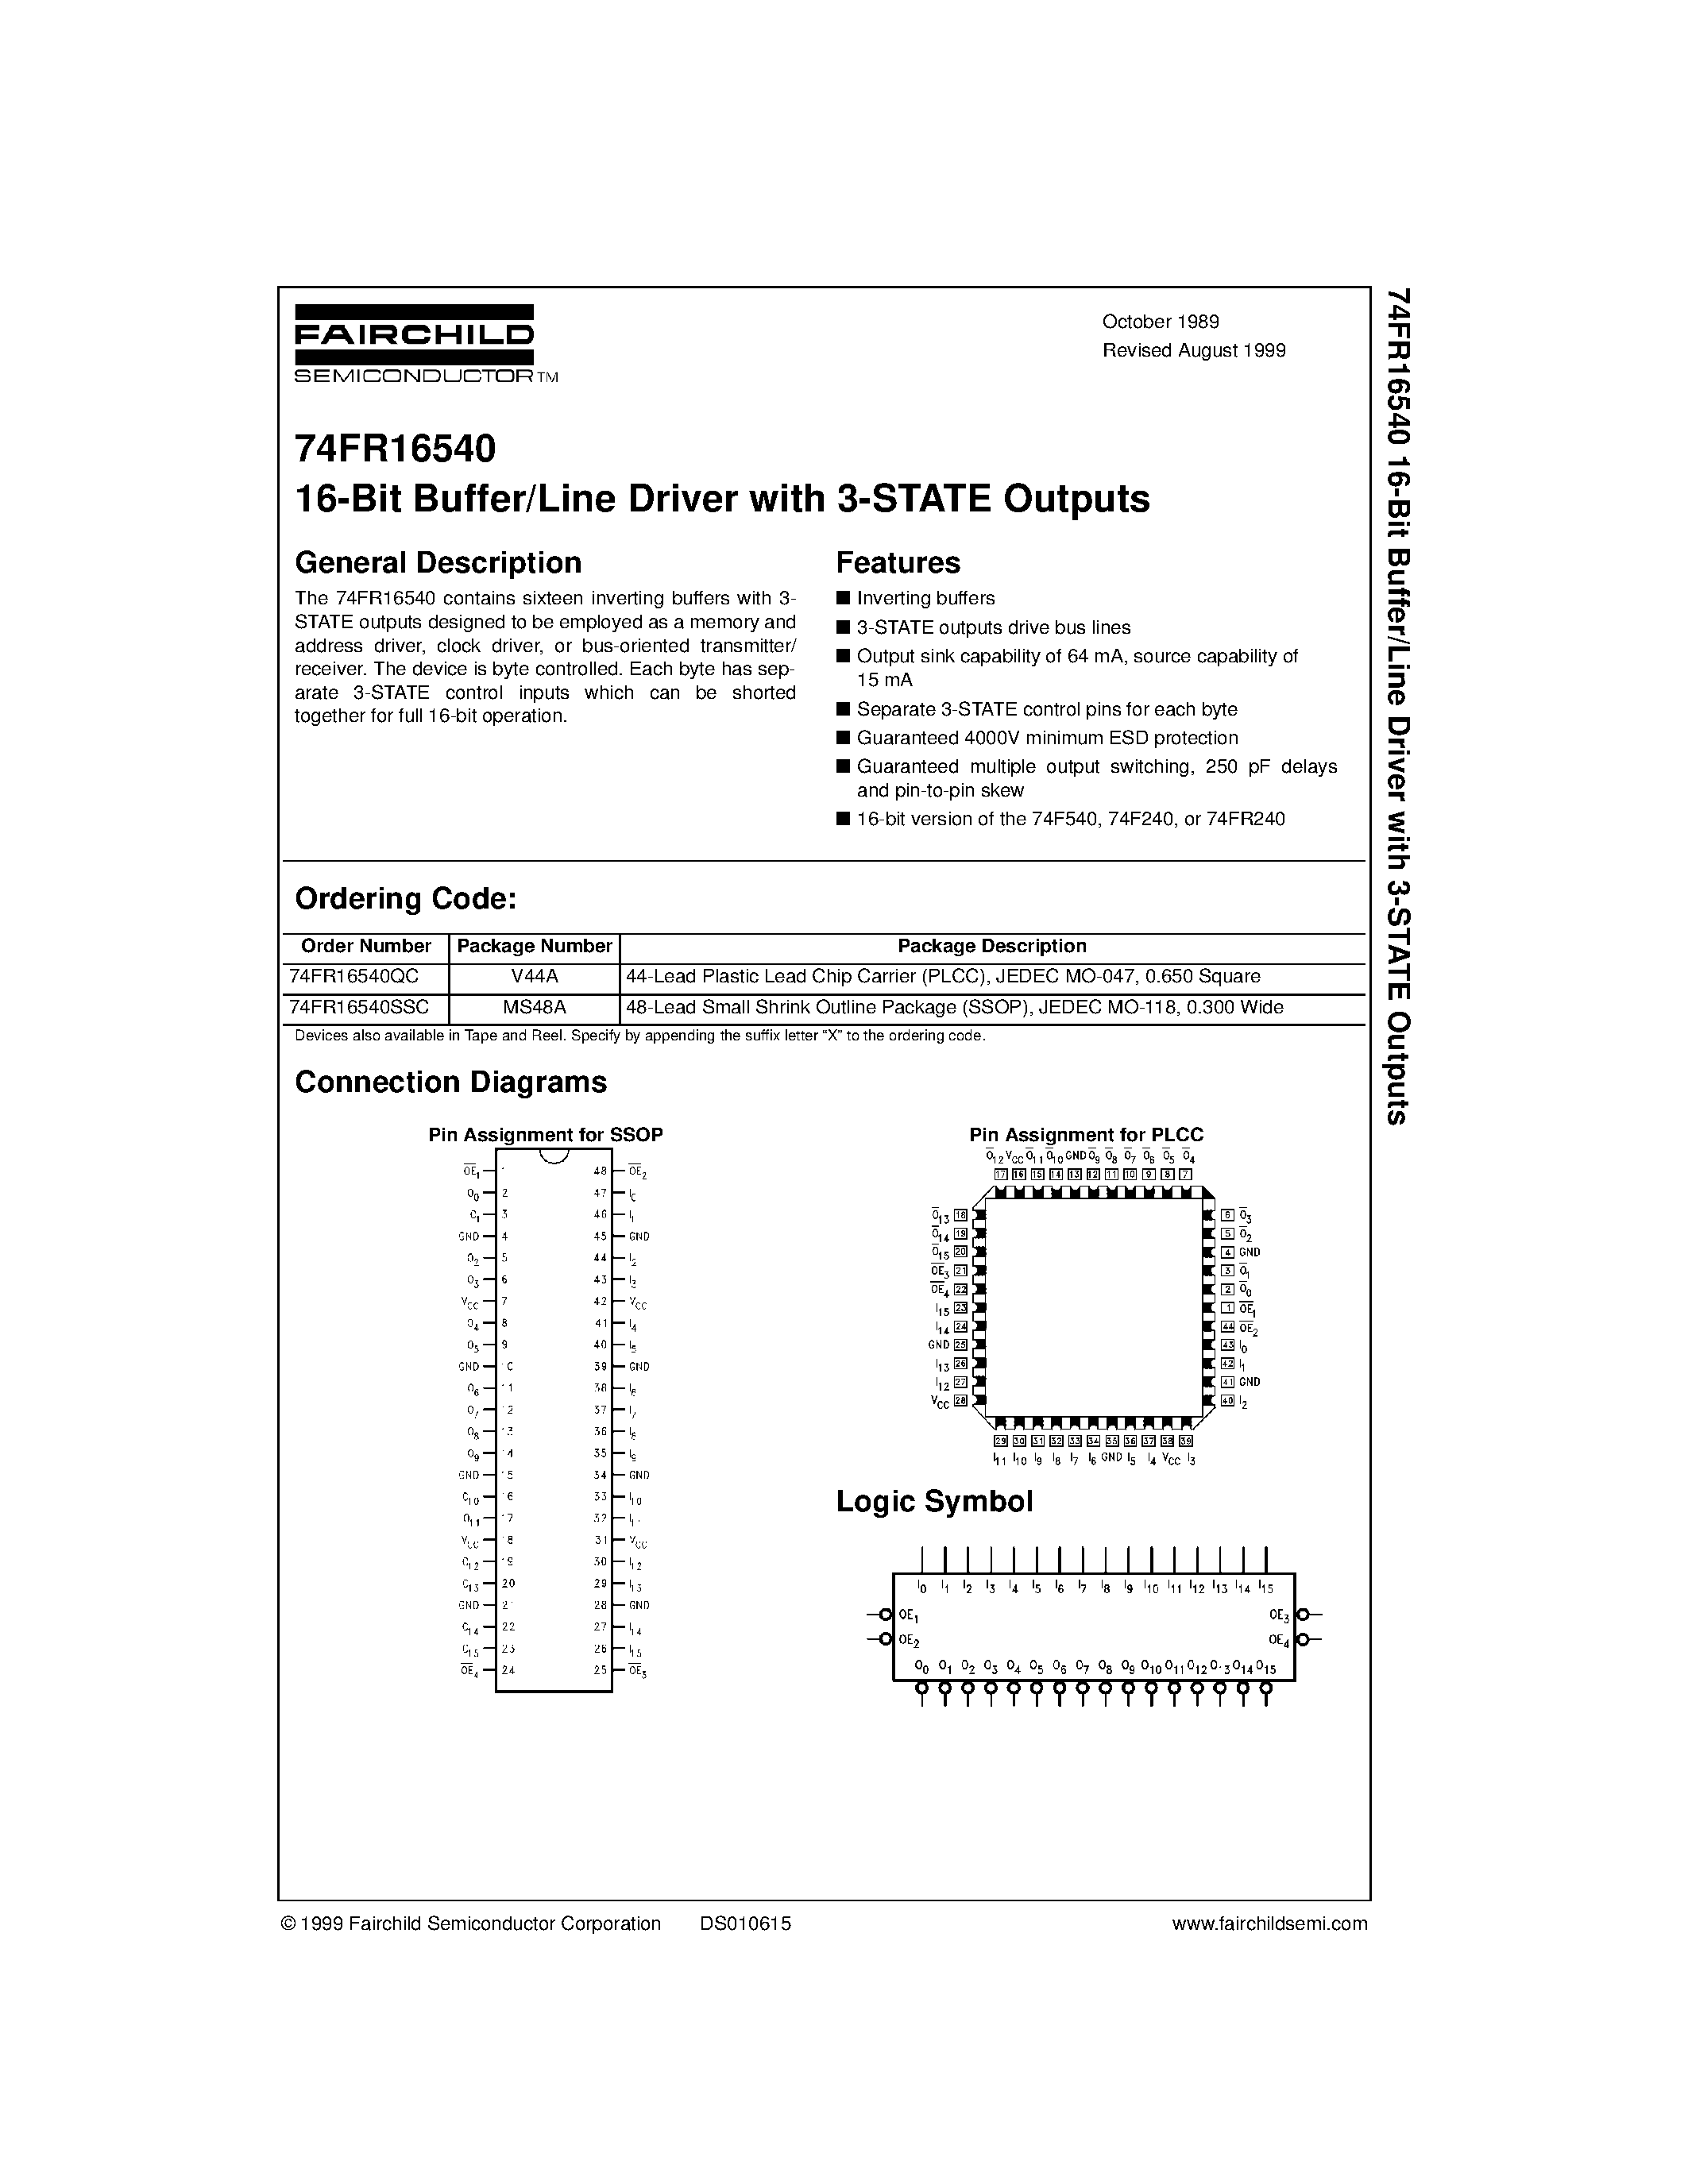 Datasheet 74FR16540SSC - 16-Bit Buffer/Line Driver with 3-STATE Outputs page 1